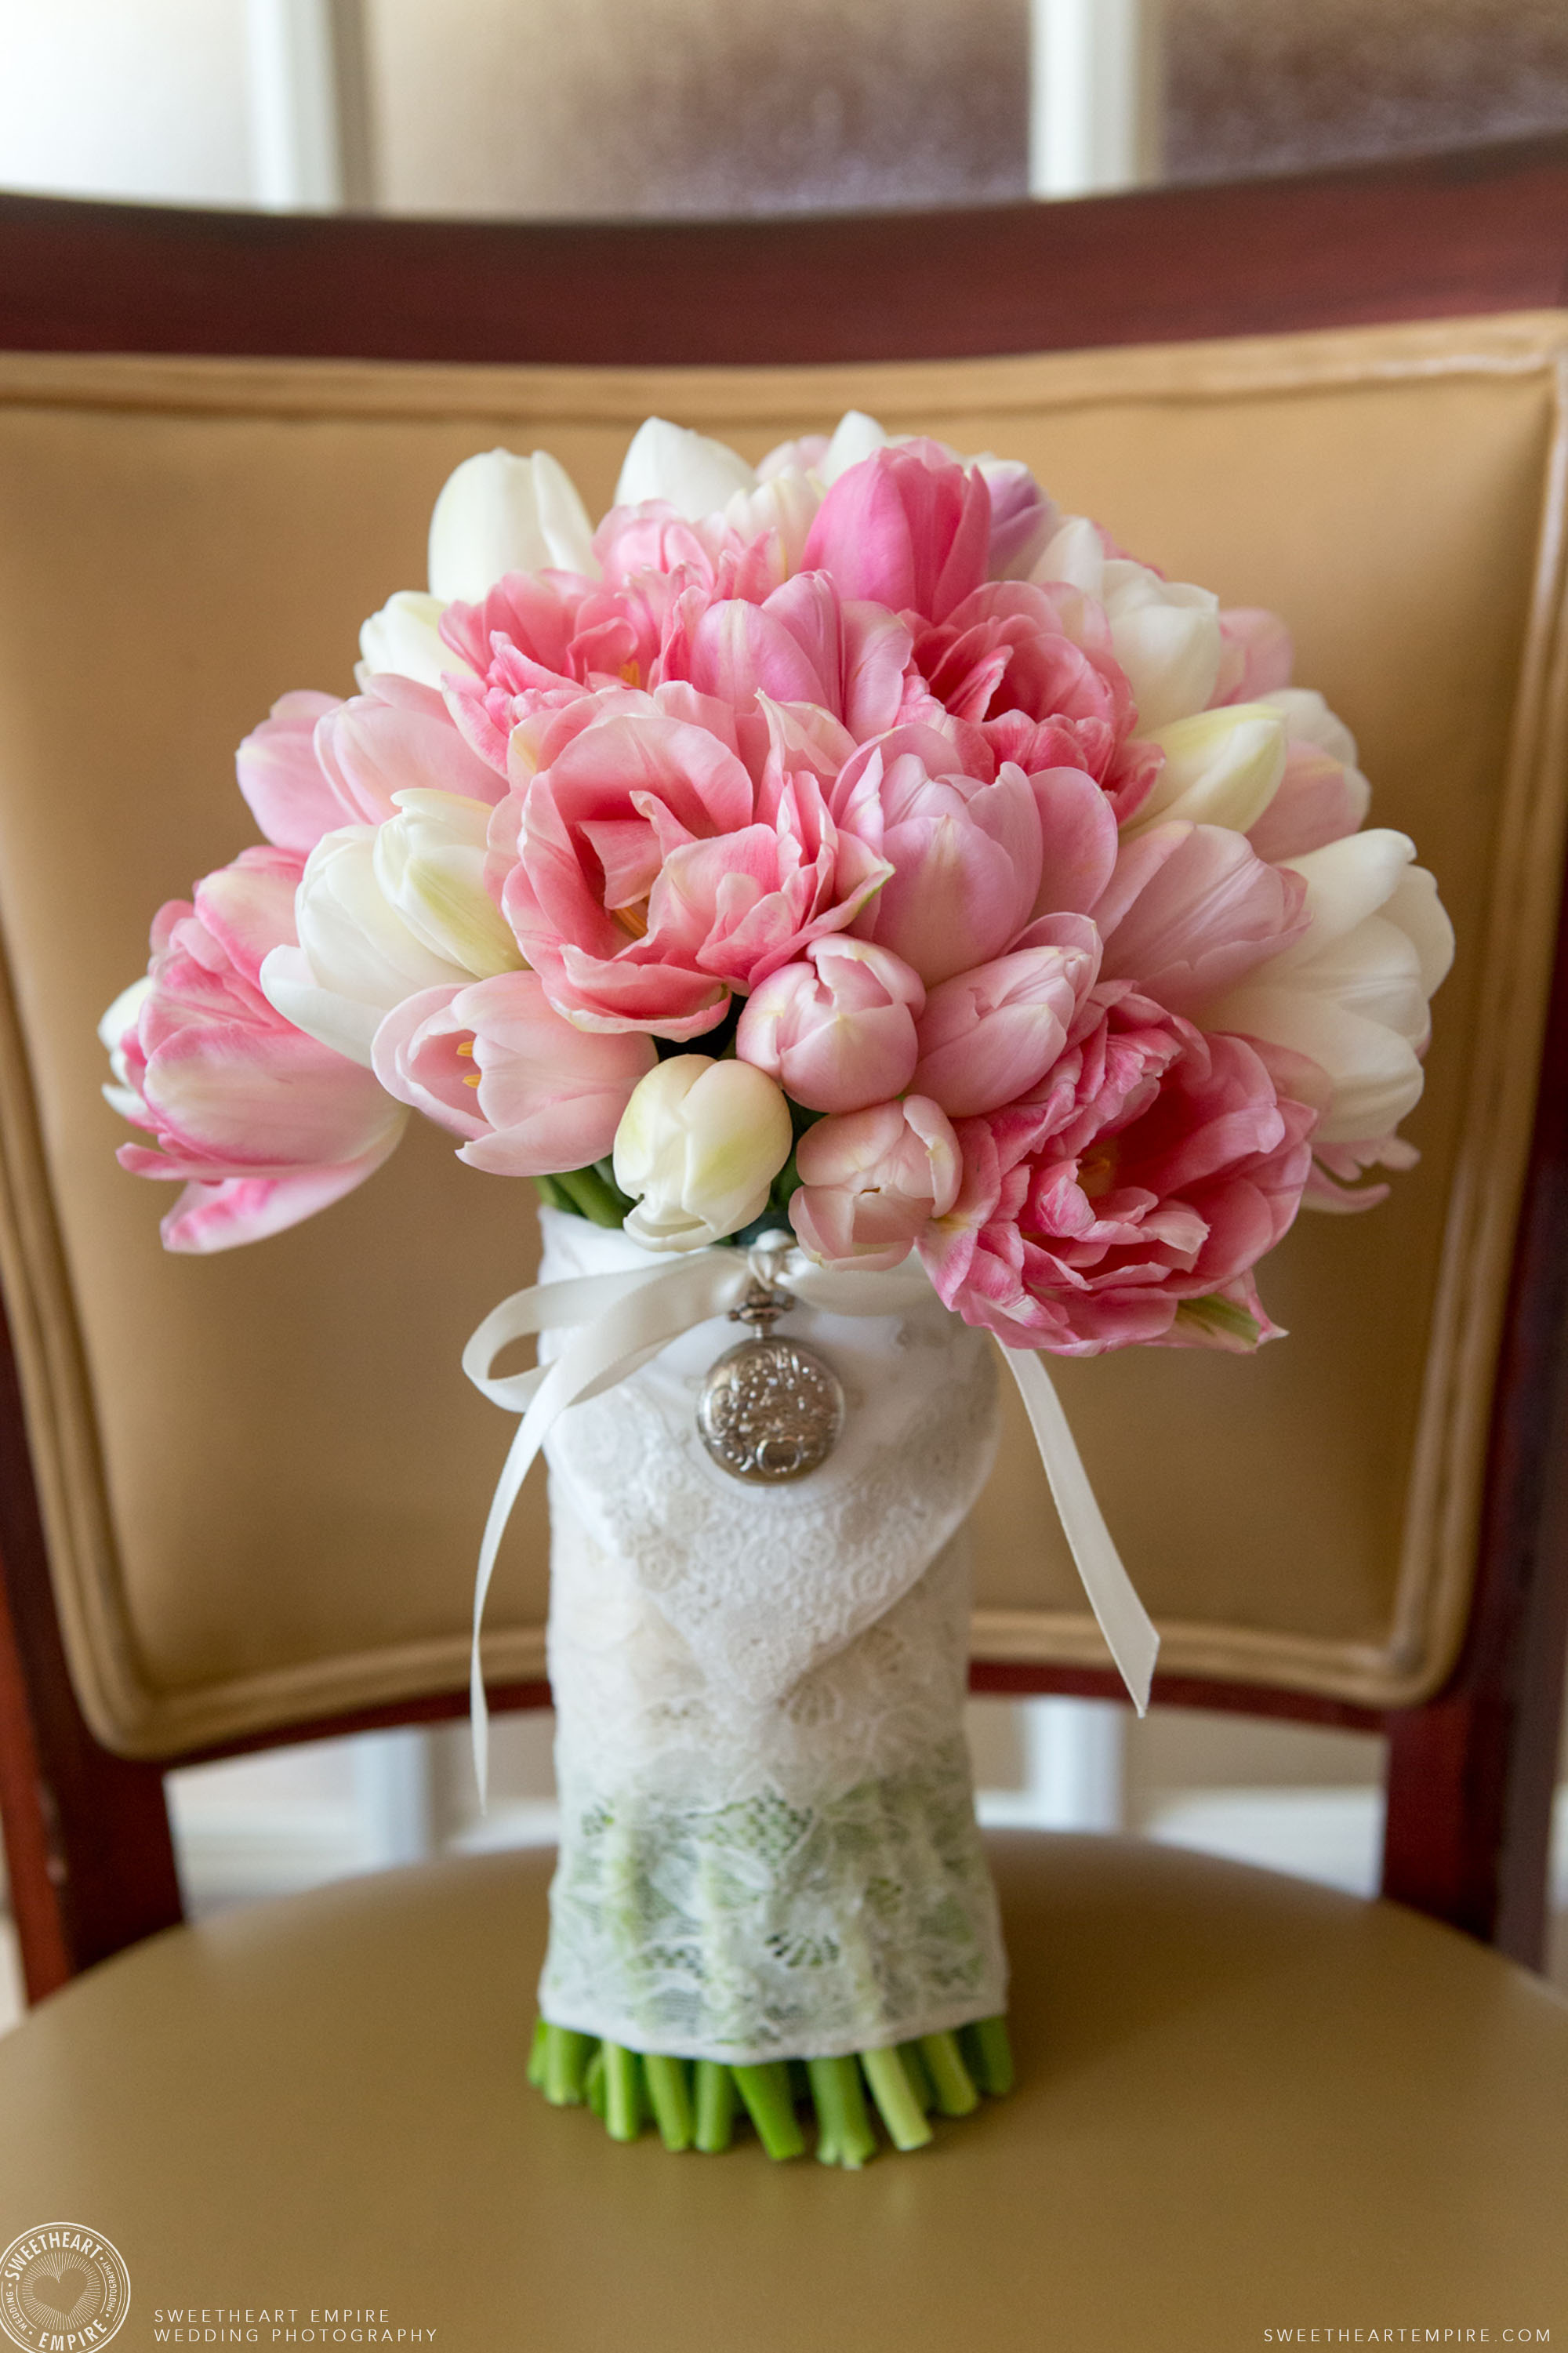 The bride's beautiful bouquet; Toronto Reference Library Wedding